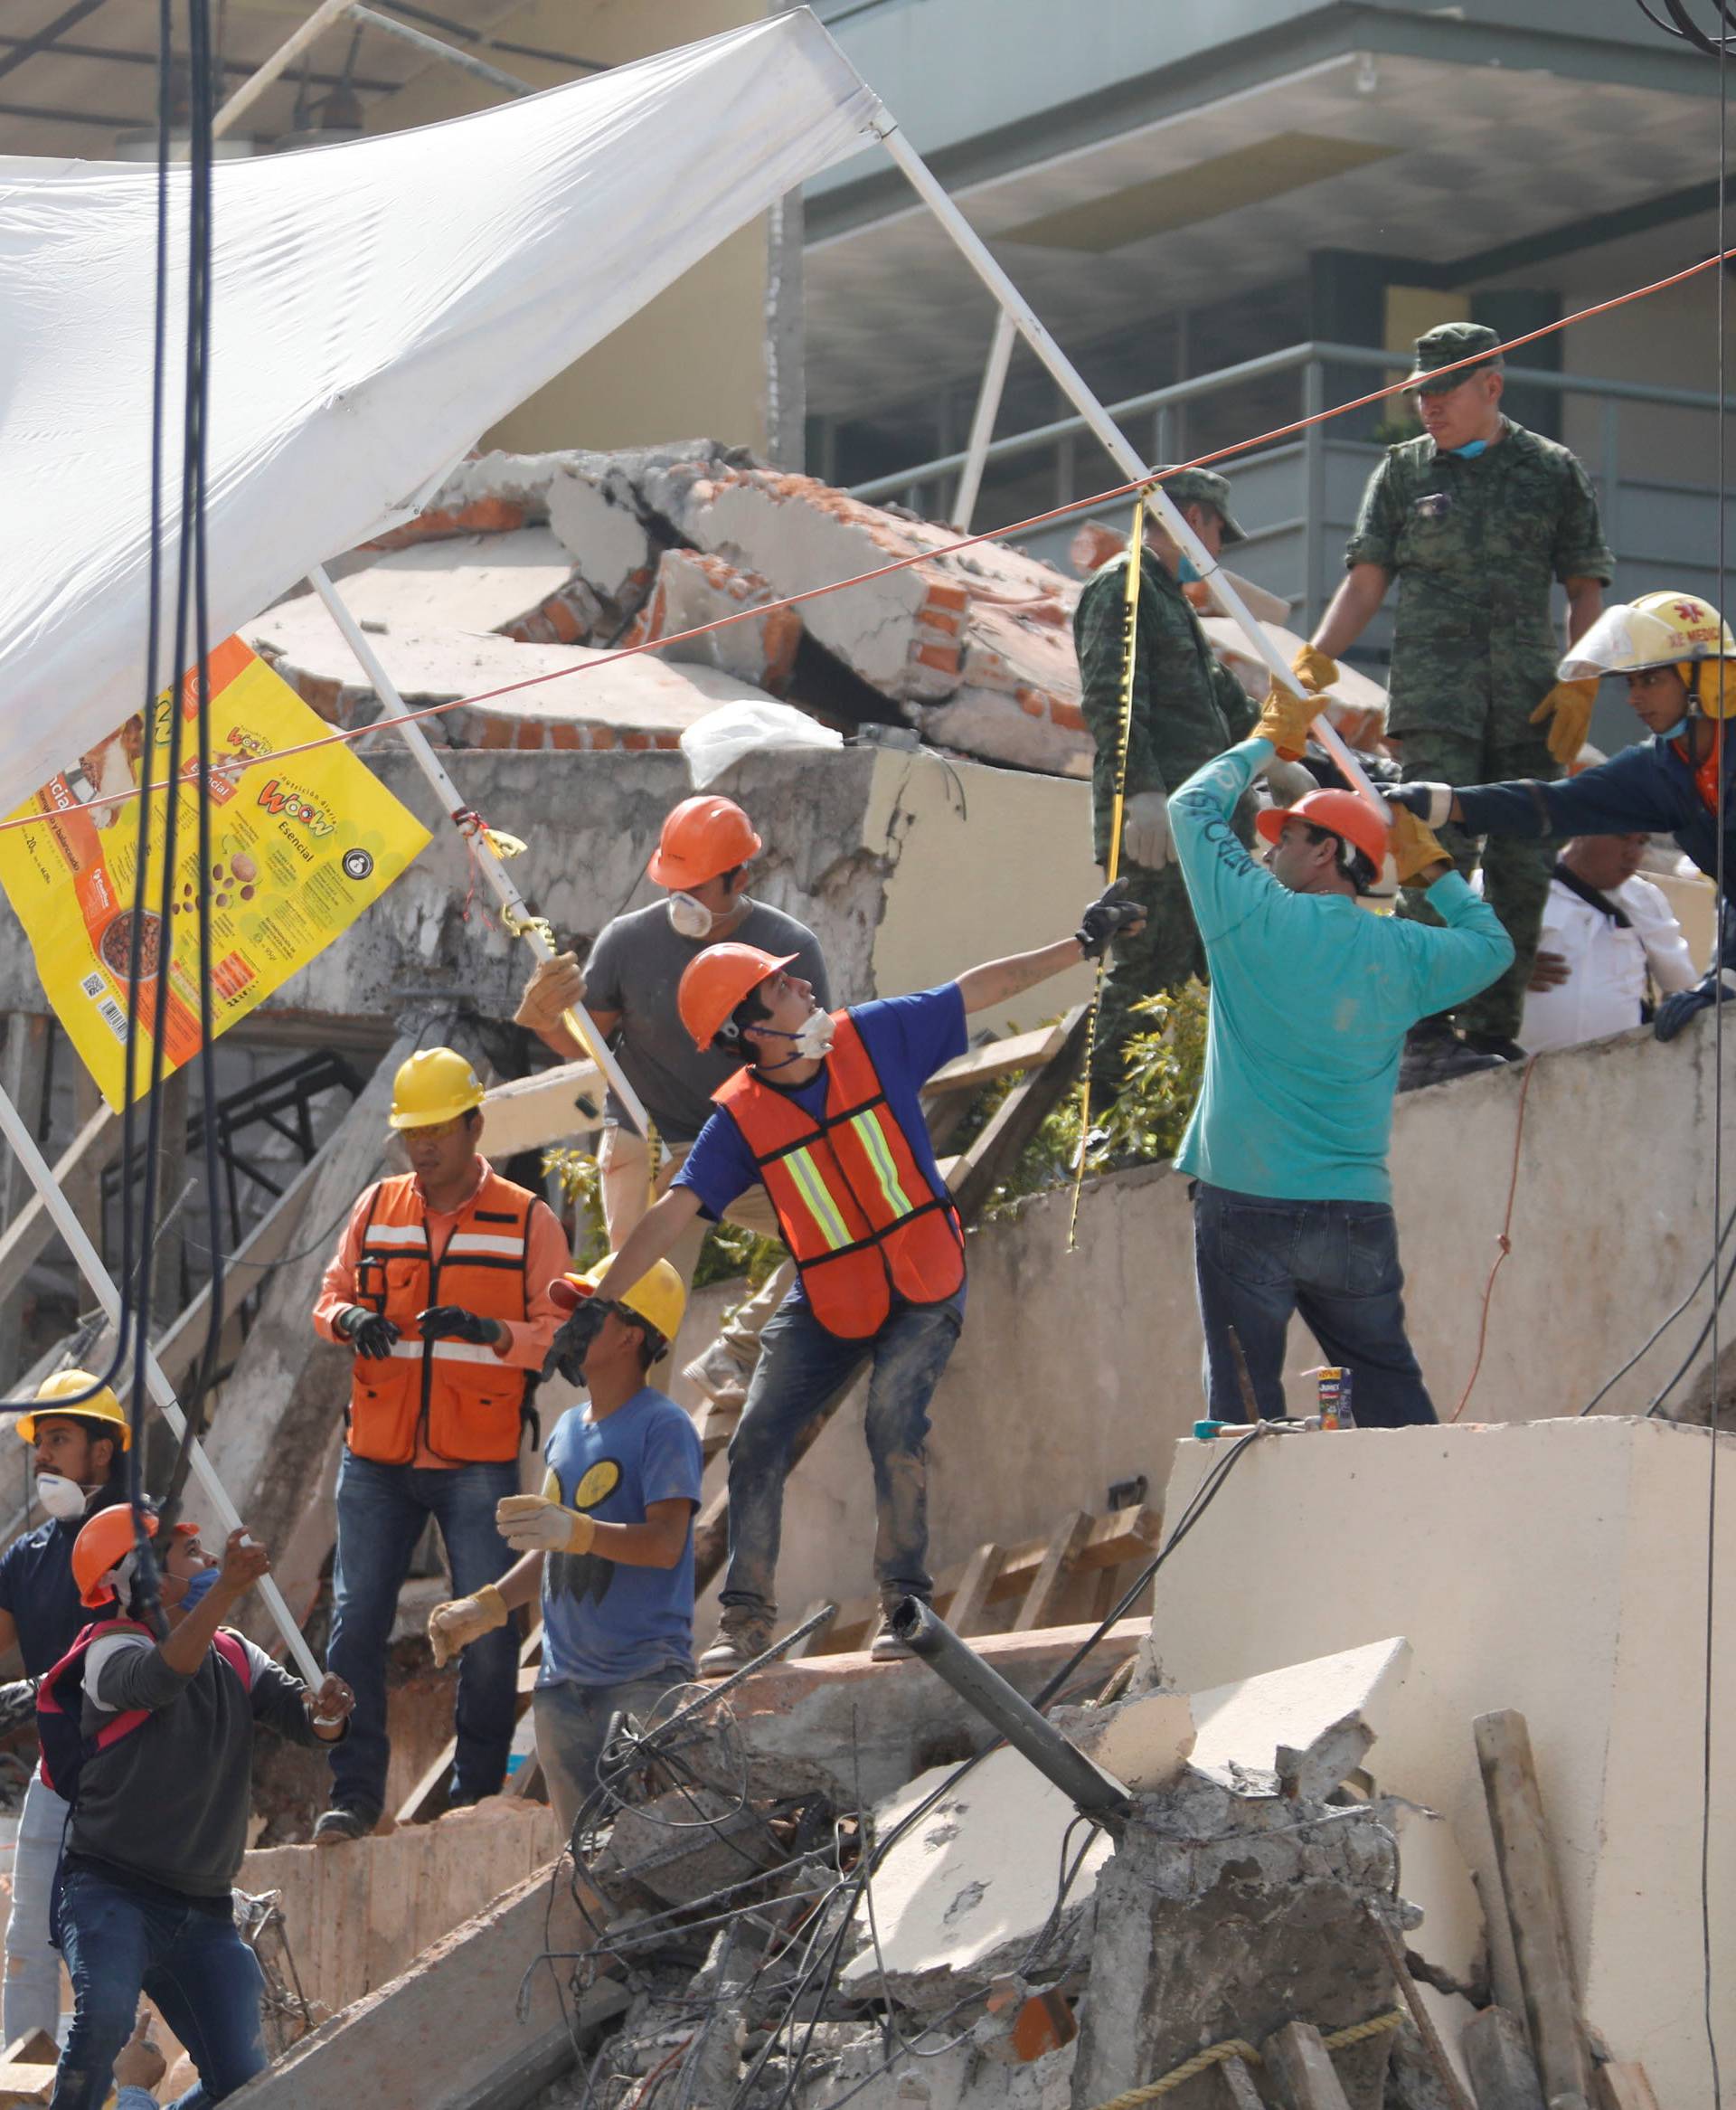 Rescue workers transport a tent as they search for students through the rubble at Enrique Rebsamen school after an earthquake in Mexico City